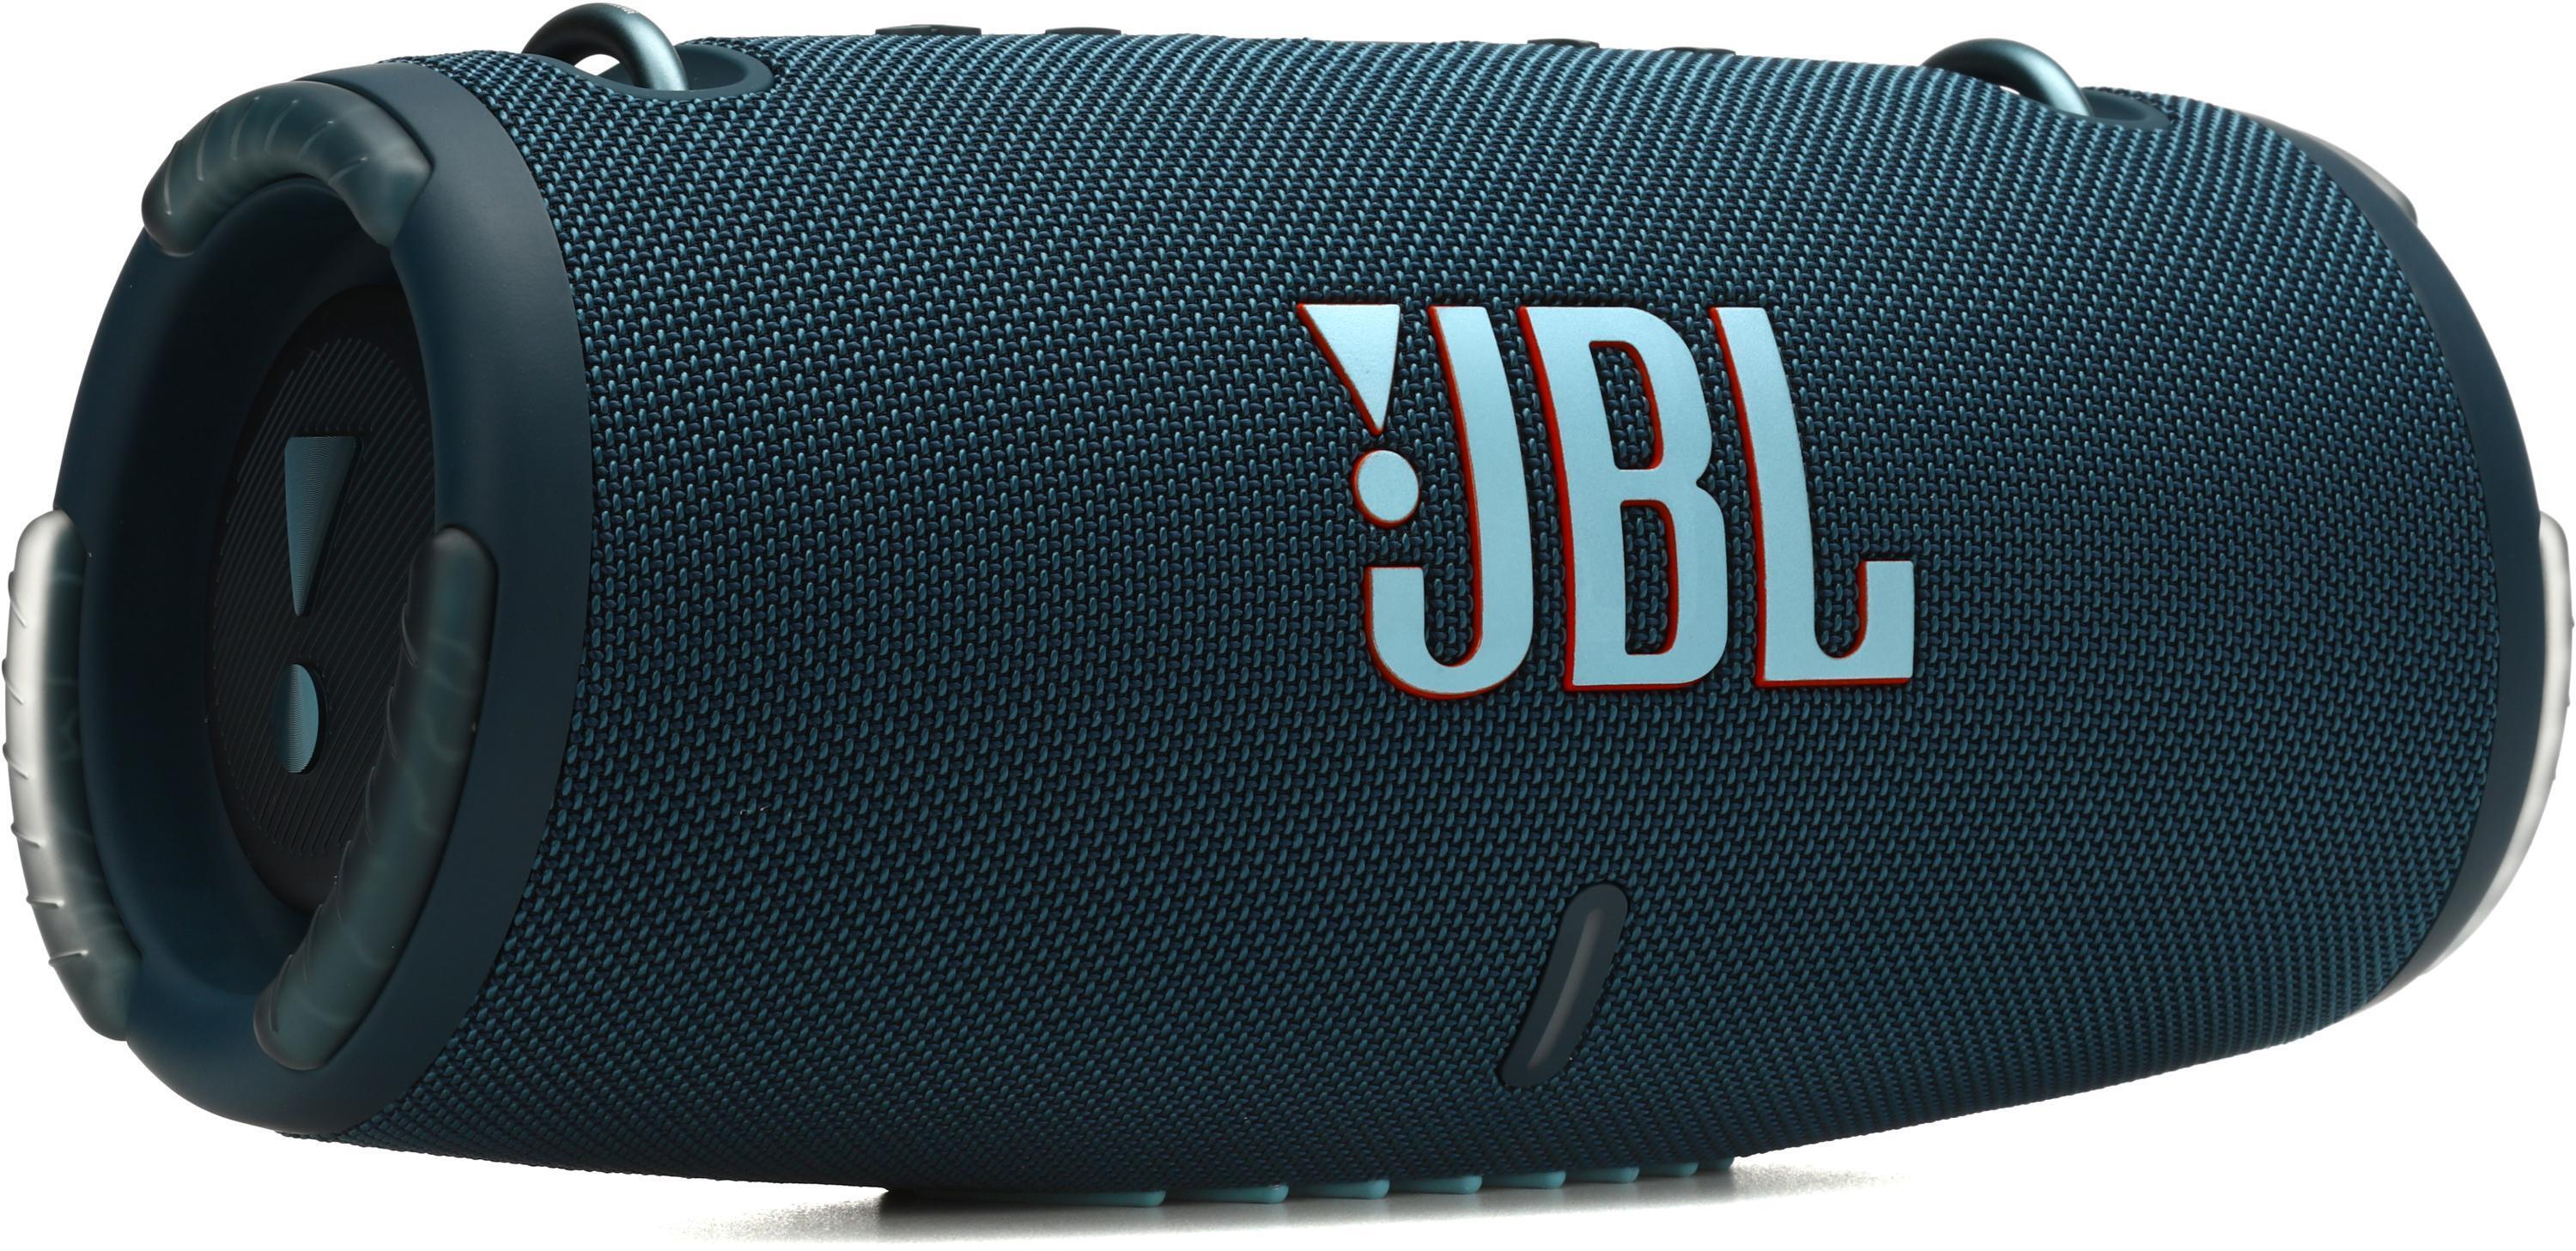 JBL Xtreme 3 Specs and Features of this Speaker - Tom's Tek Stop